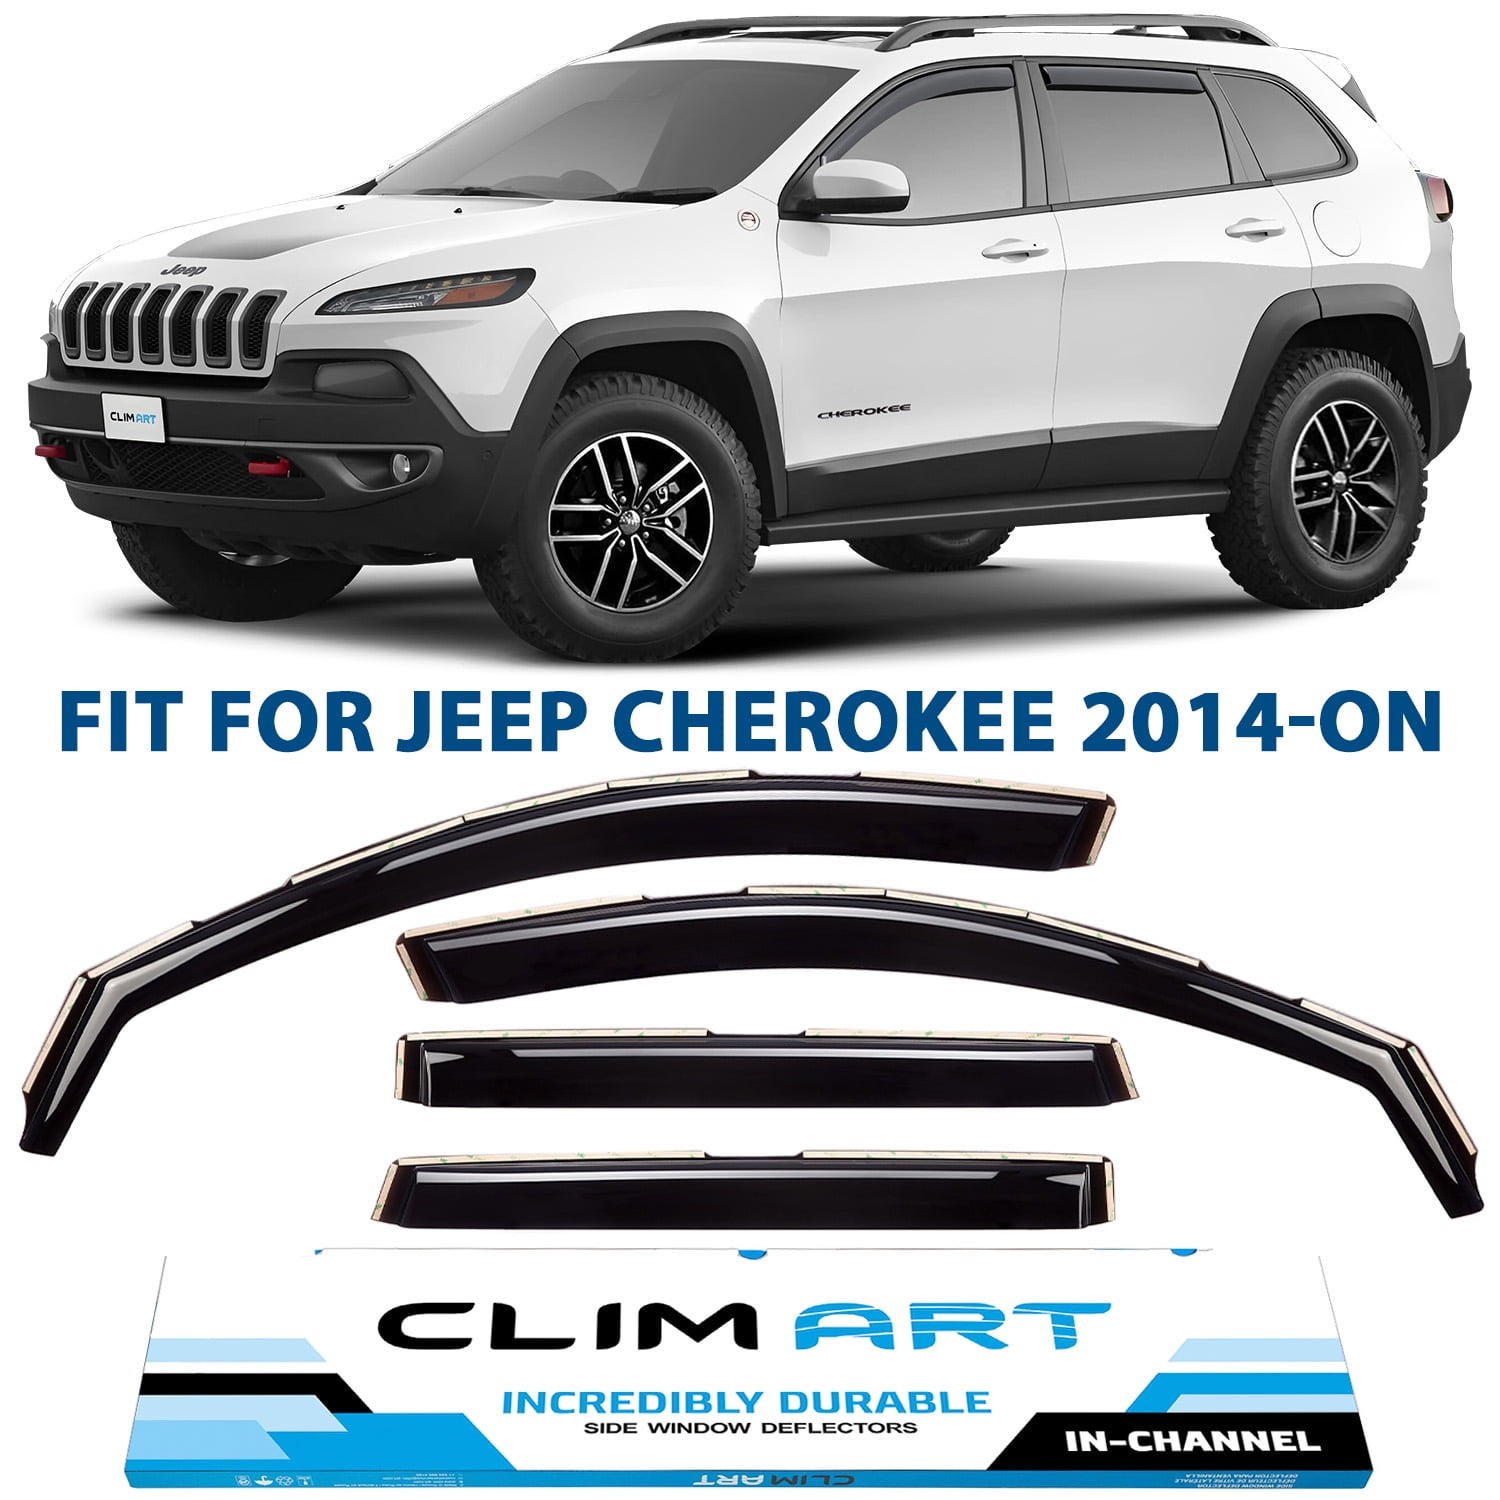 CLIM ART in-Channel Incredibly Durable Rain Guards for Jeep